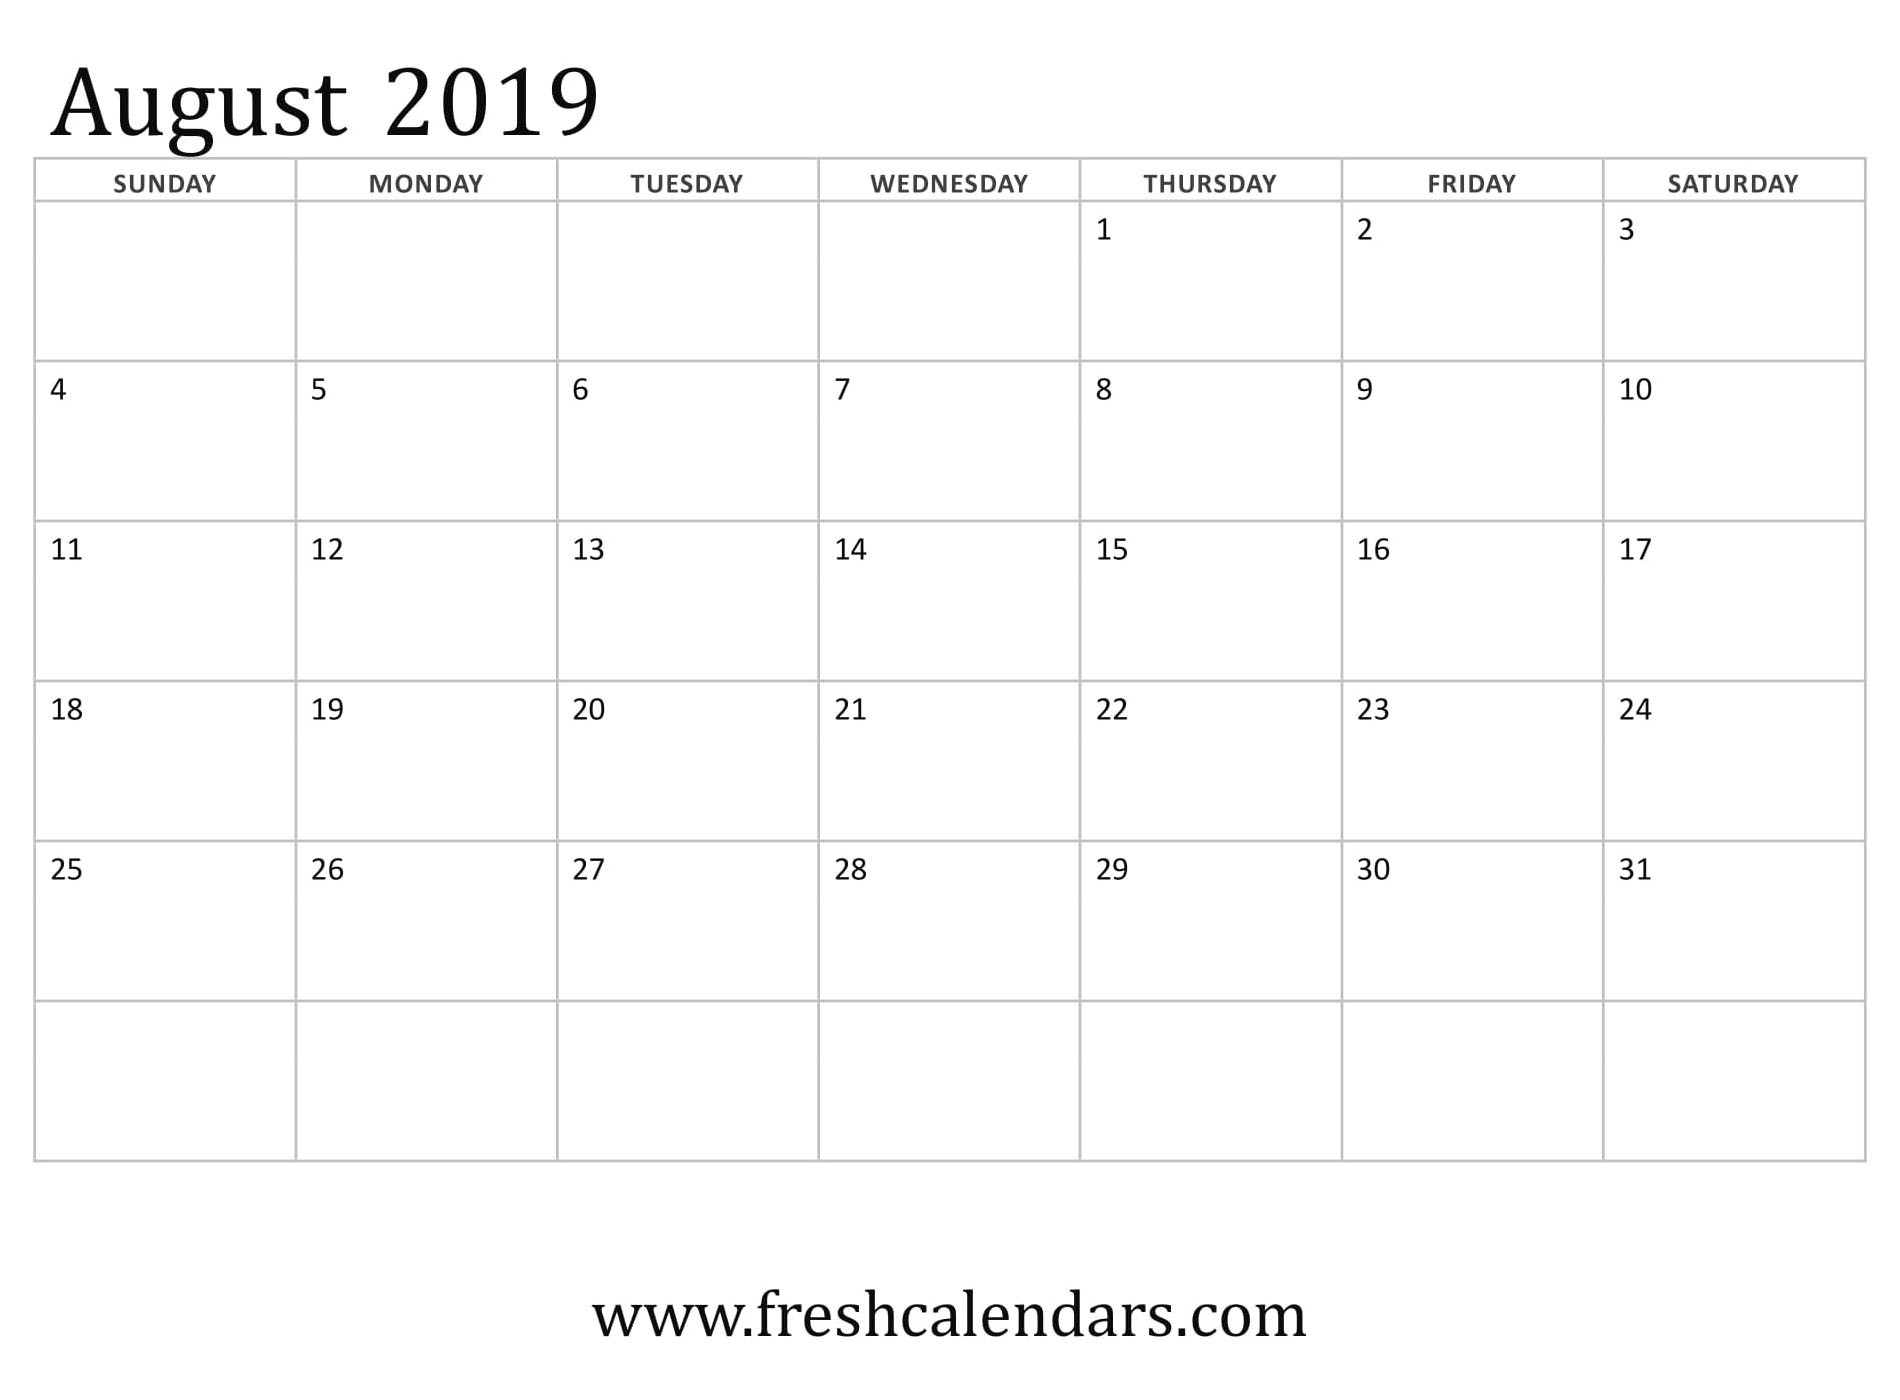 August 2019 Calendar Printable - Fresh Calendars-Blank Calendar Template With Space For Memo And Notes Printable